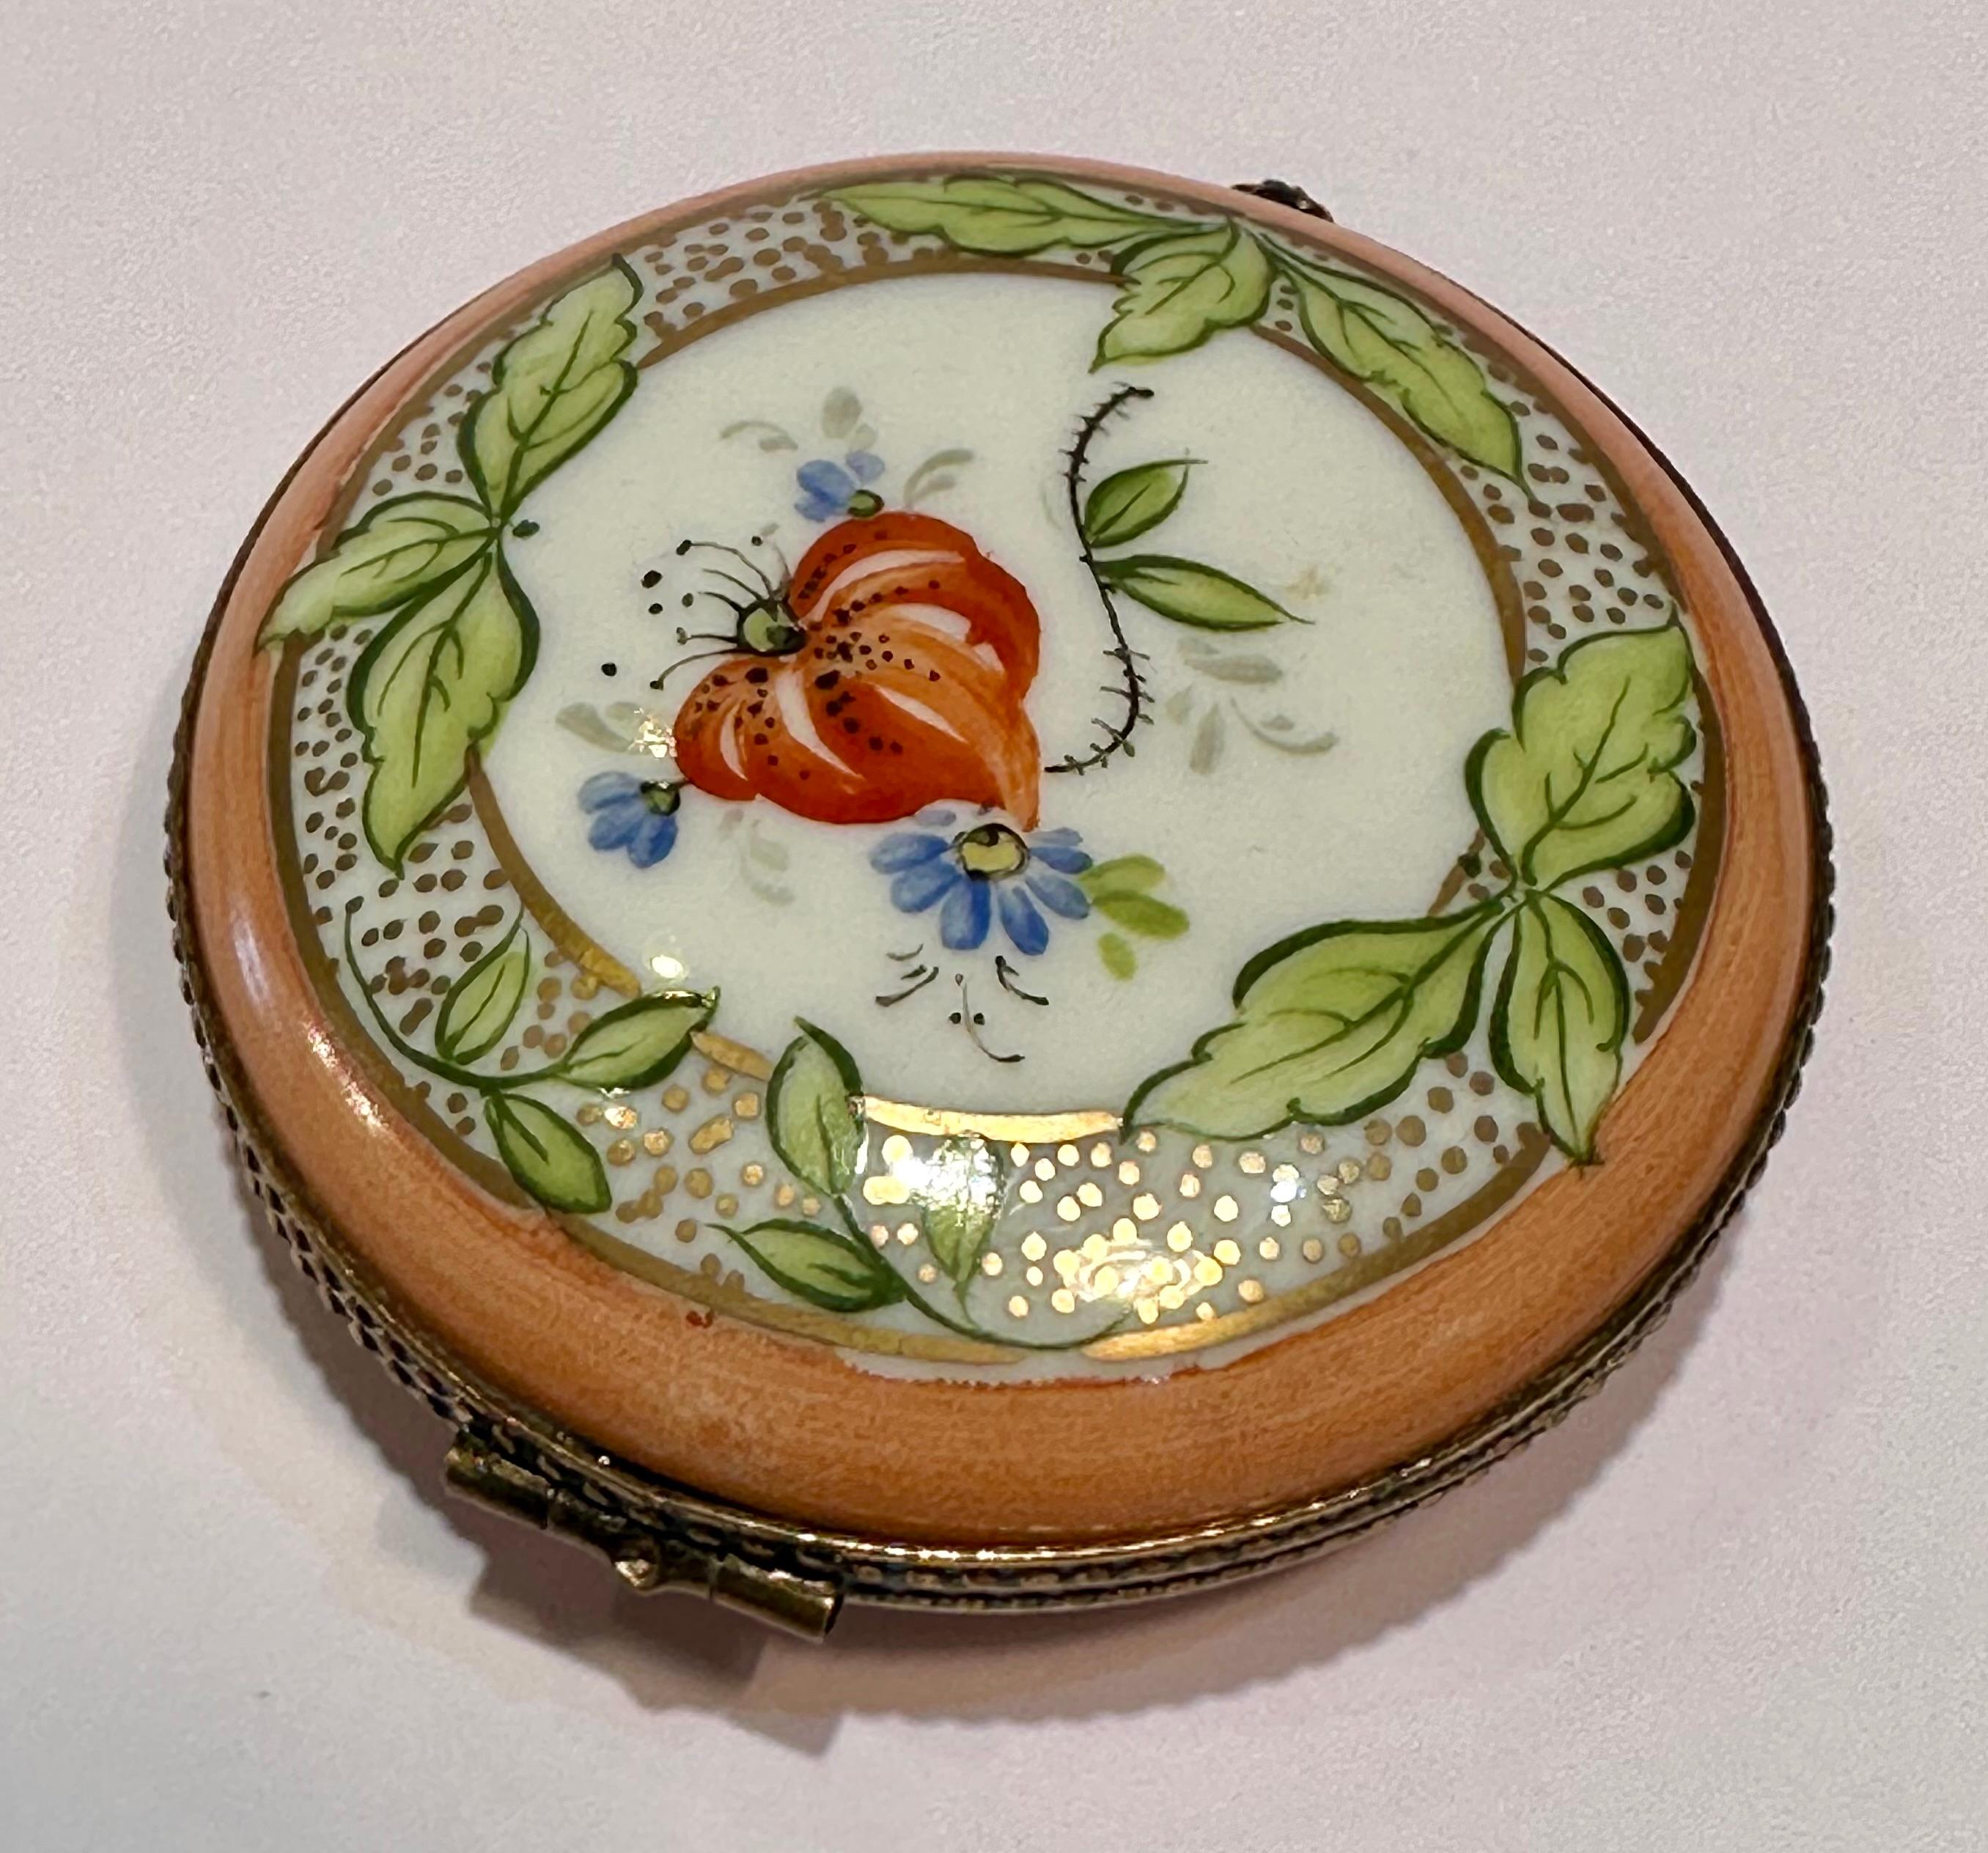 Beautiful Limoges France Hand Painted Porcelain Circular Shaped Trinket Box  In Good Condition For Sale In Tustin, CA